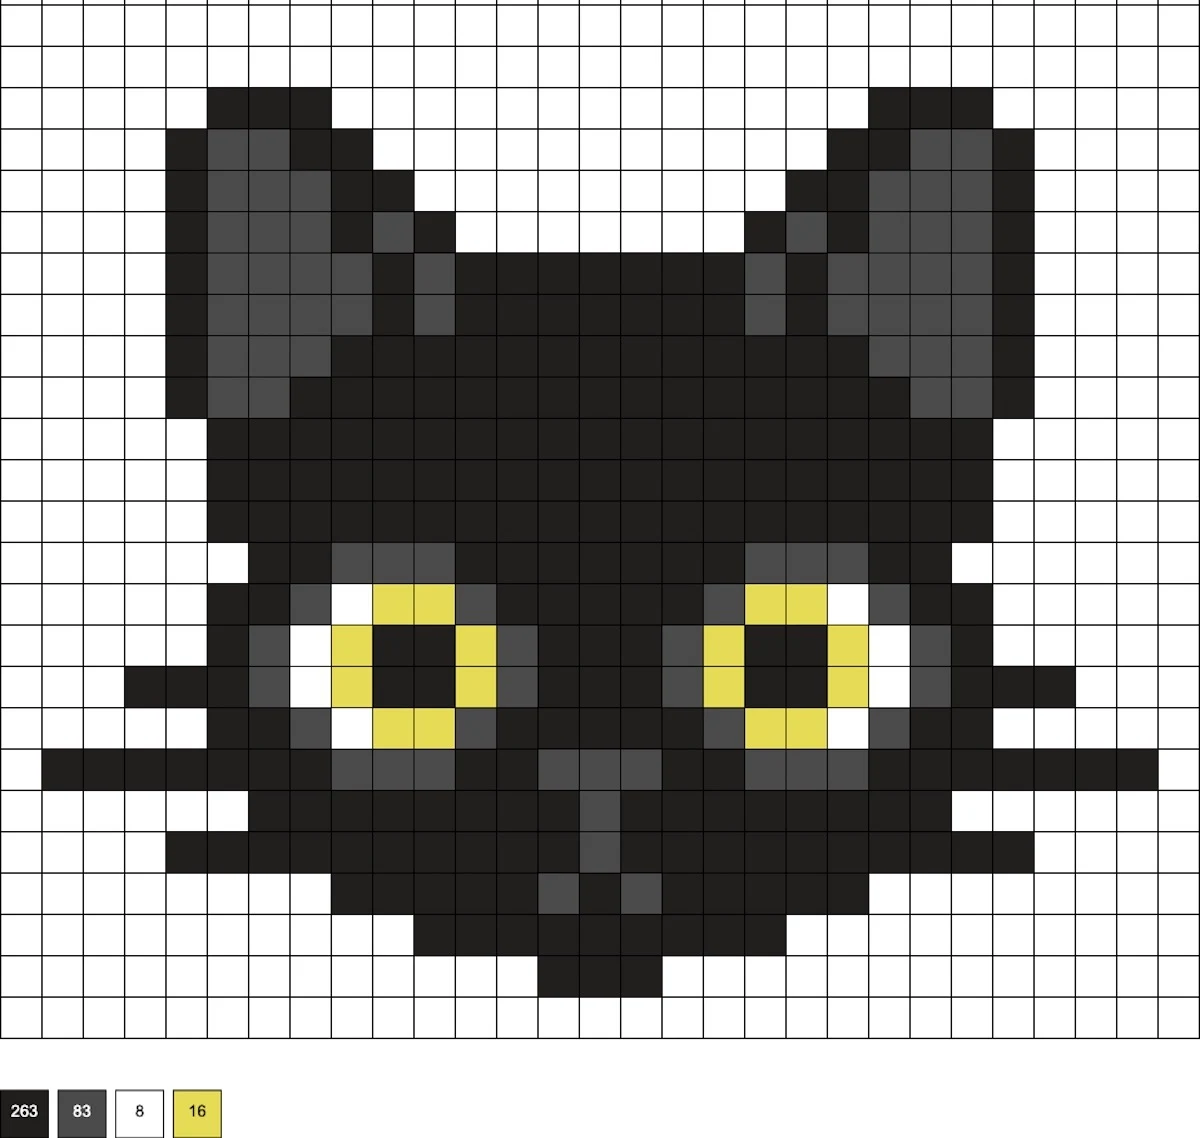 15 Cat Perler Beads For Young Artists - DIY Crafts